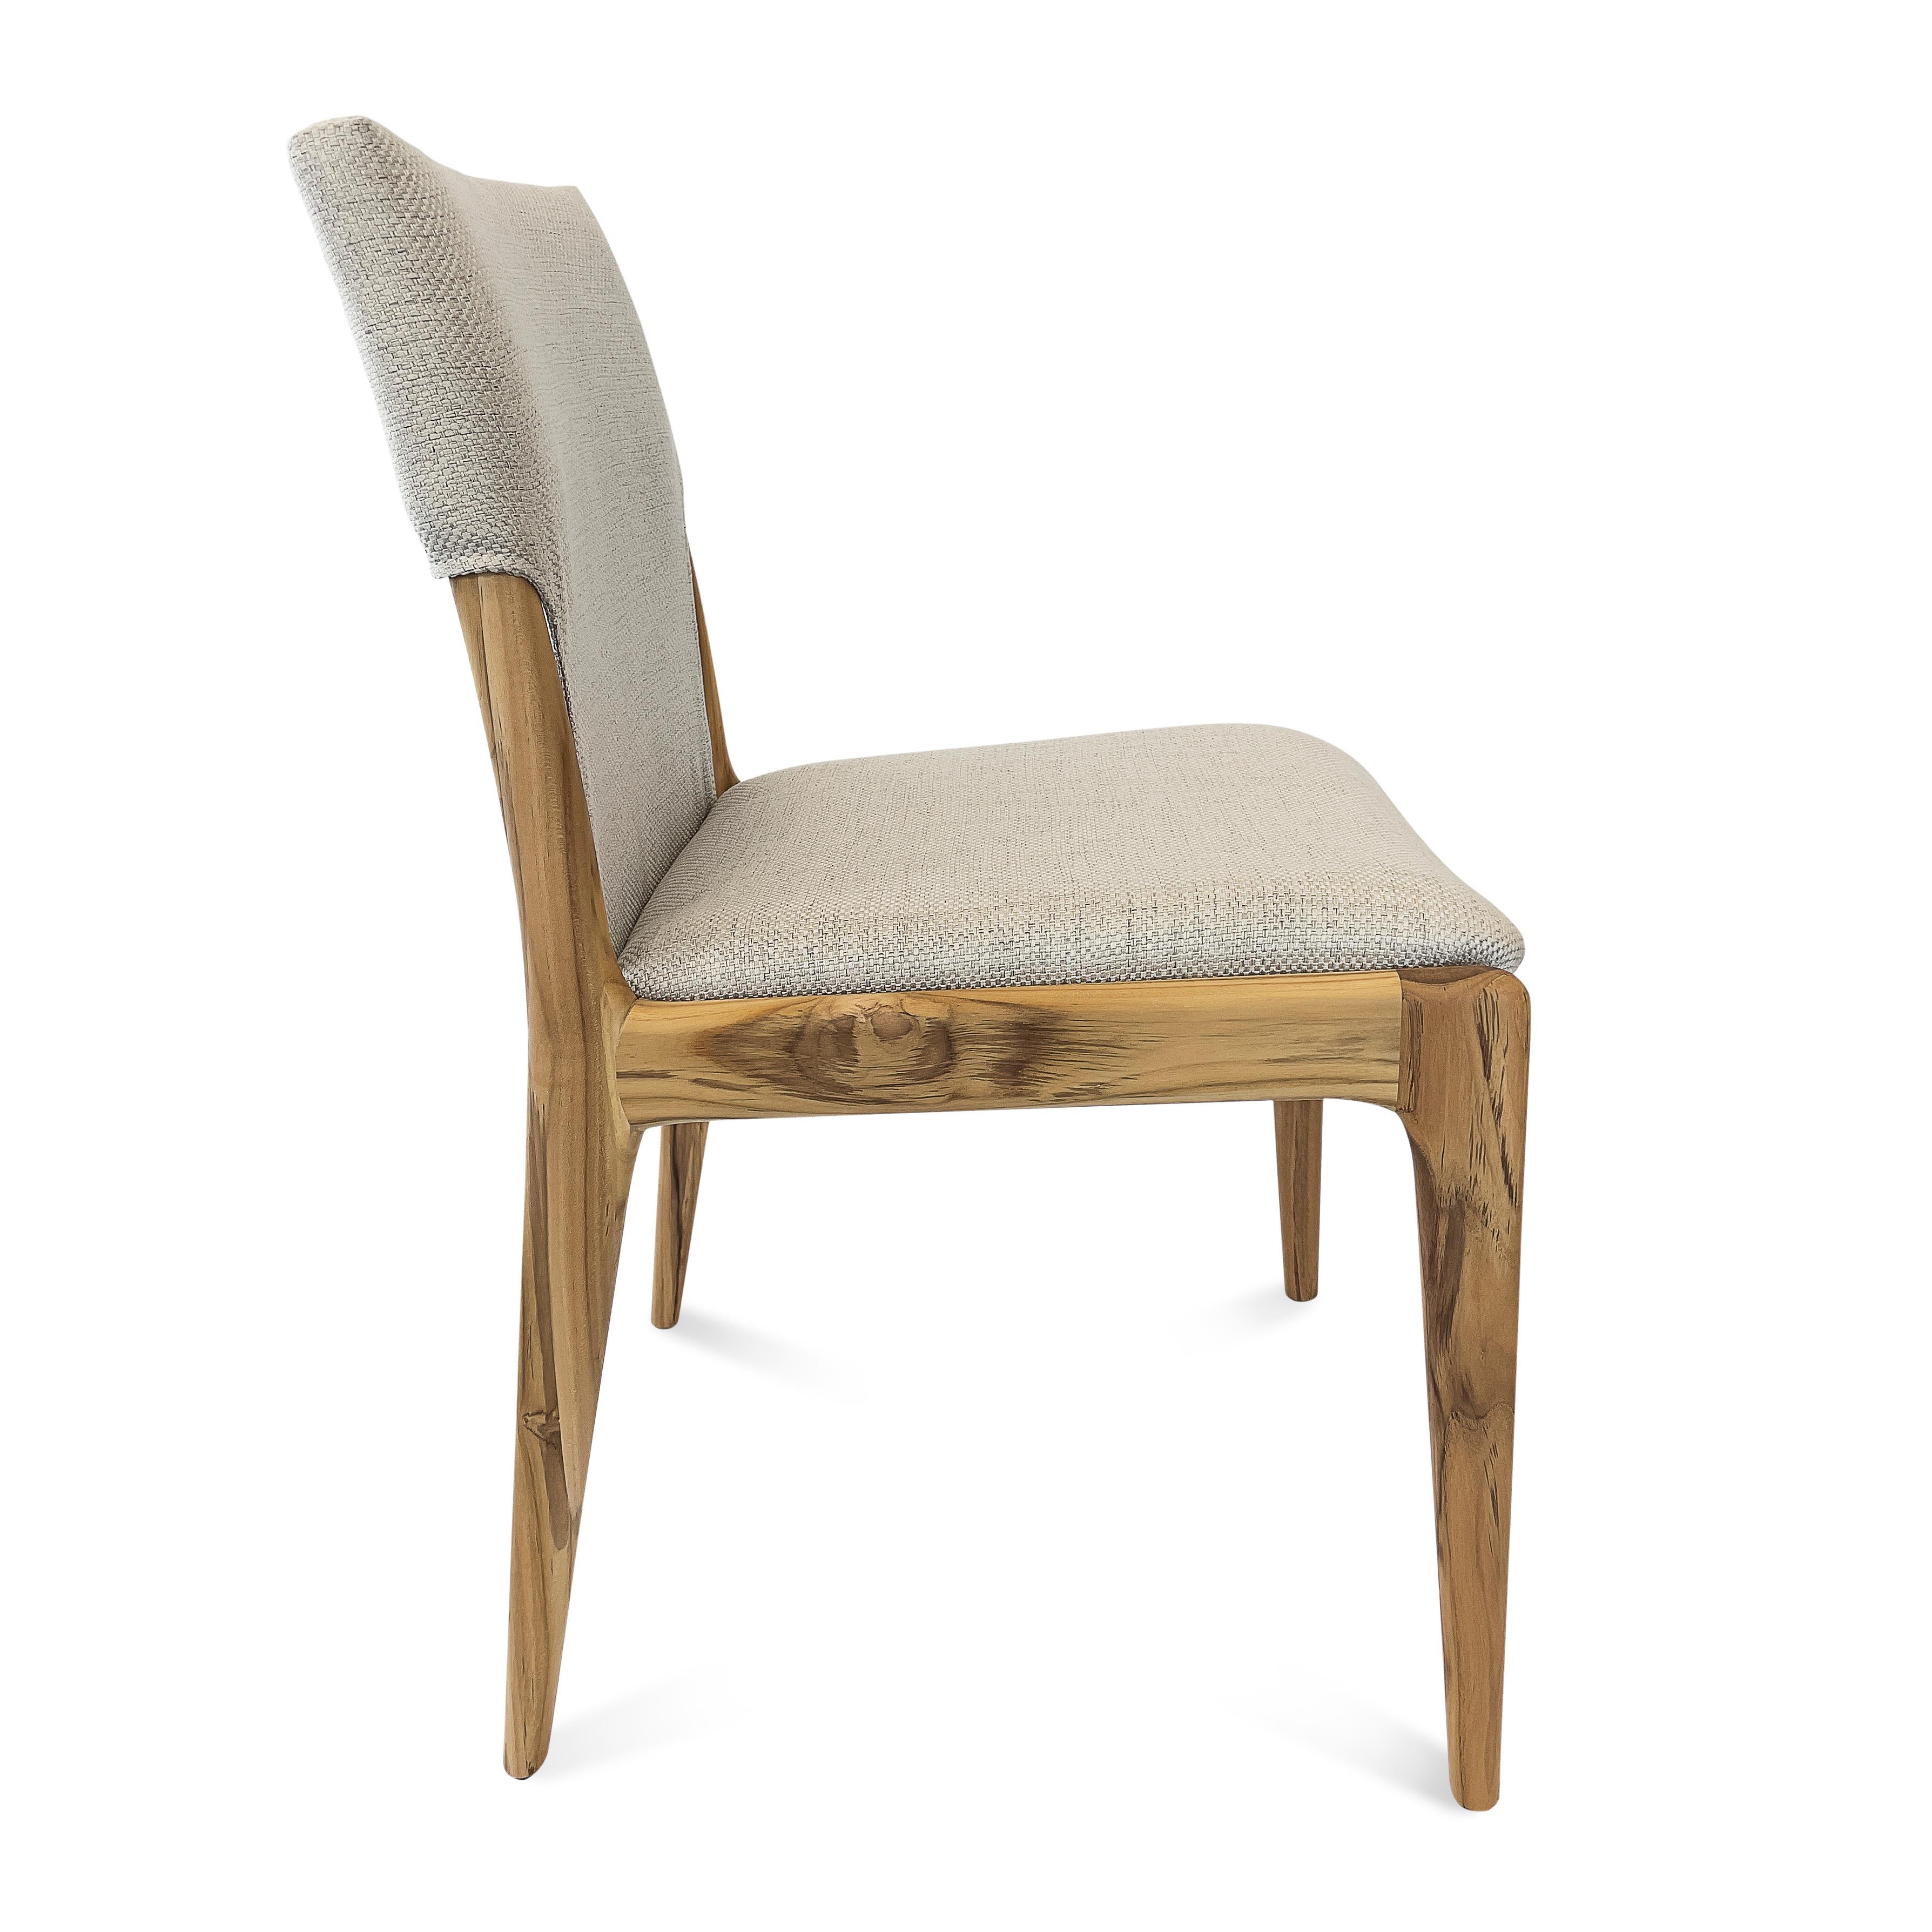 Brazilian Tress in Light Beige Fabric Upholstered Dining Chair in Teak Wood, set of 2 For Sale